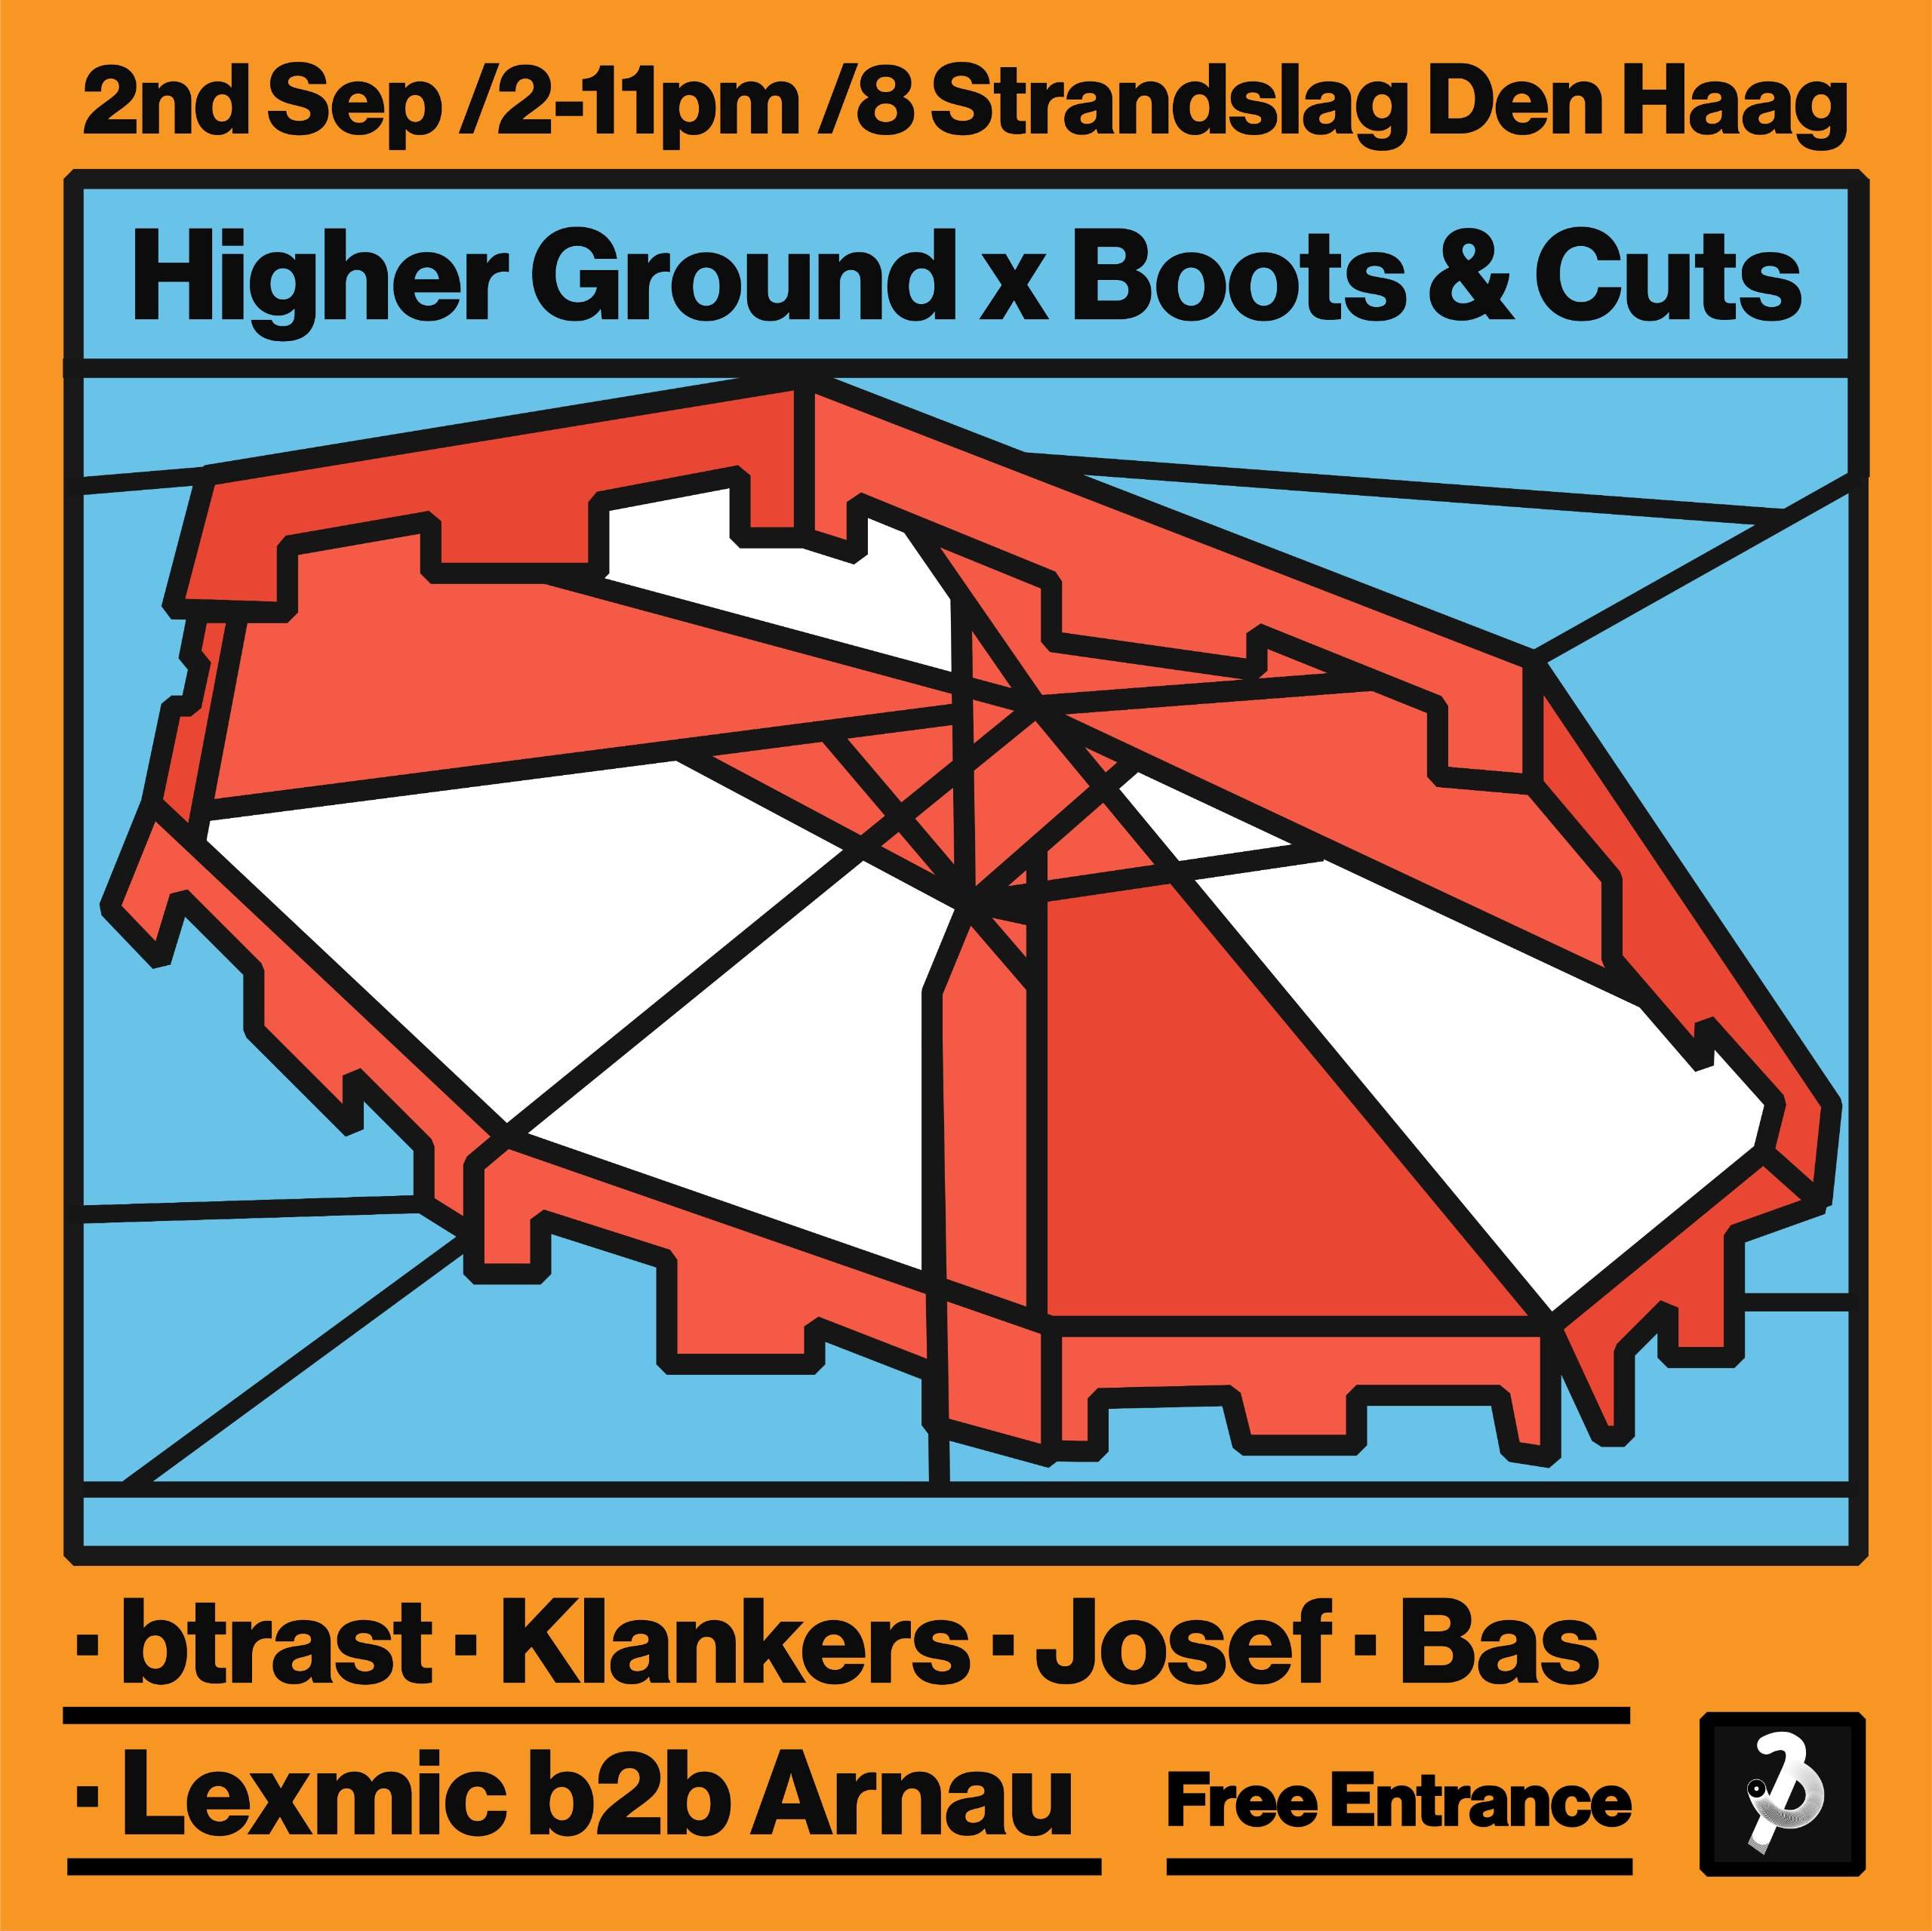 Higher Ground x Boots & Cuts: Free Beach Party - フライヤー表